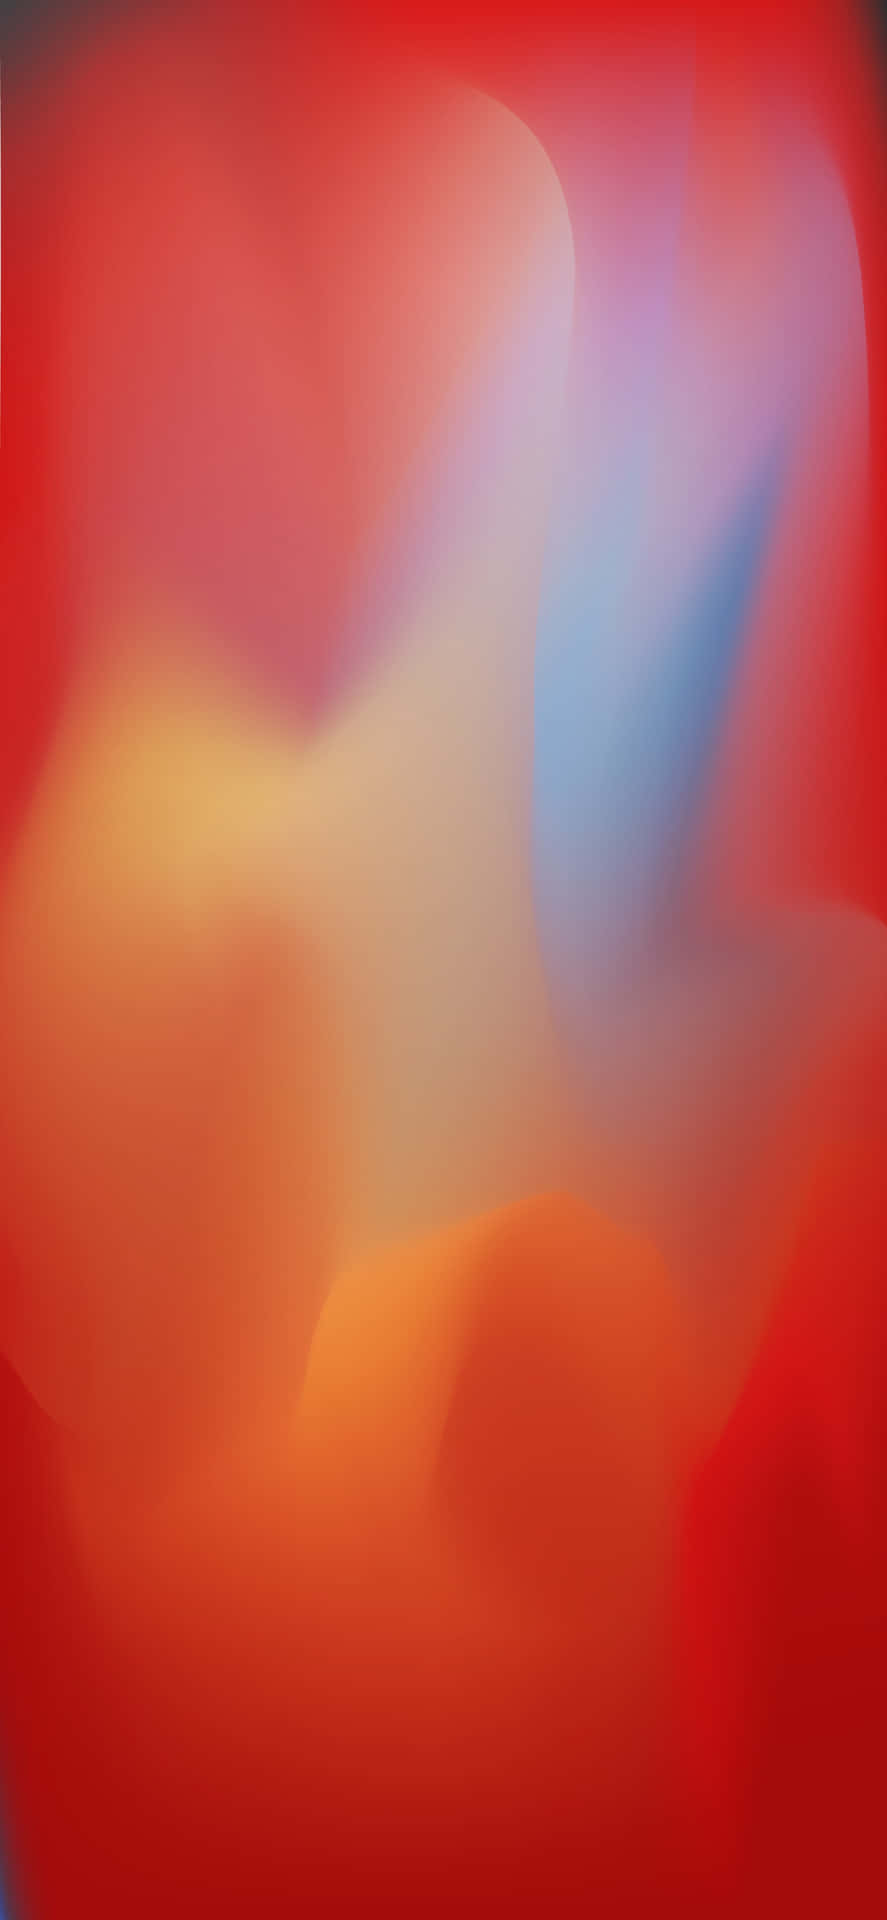 Download Abstract Red And Blue Background Wallpaper | Wallpapers.com